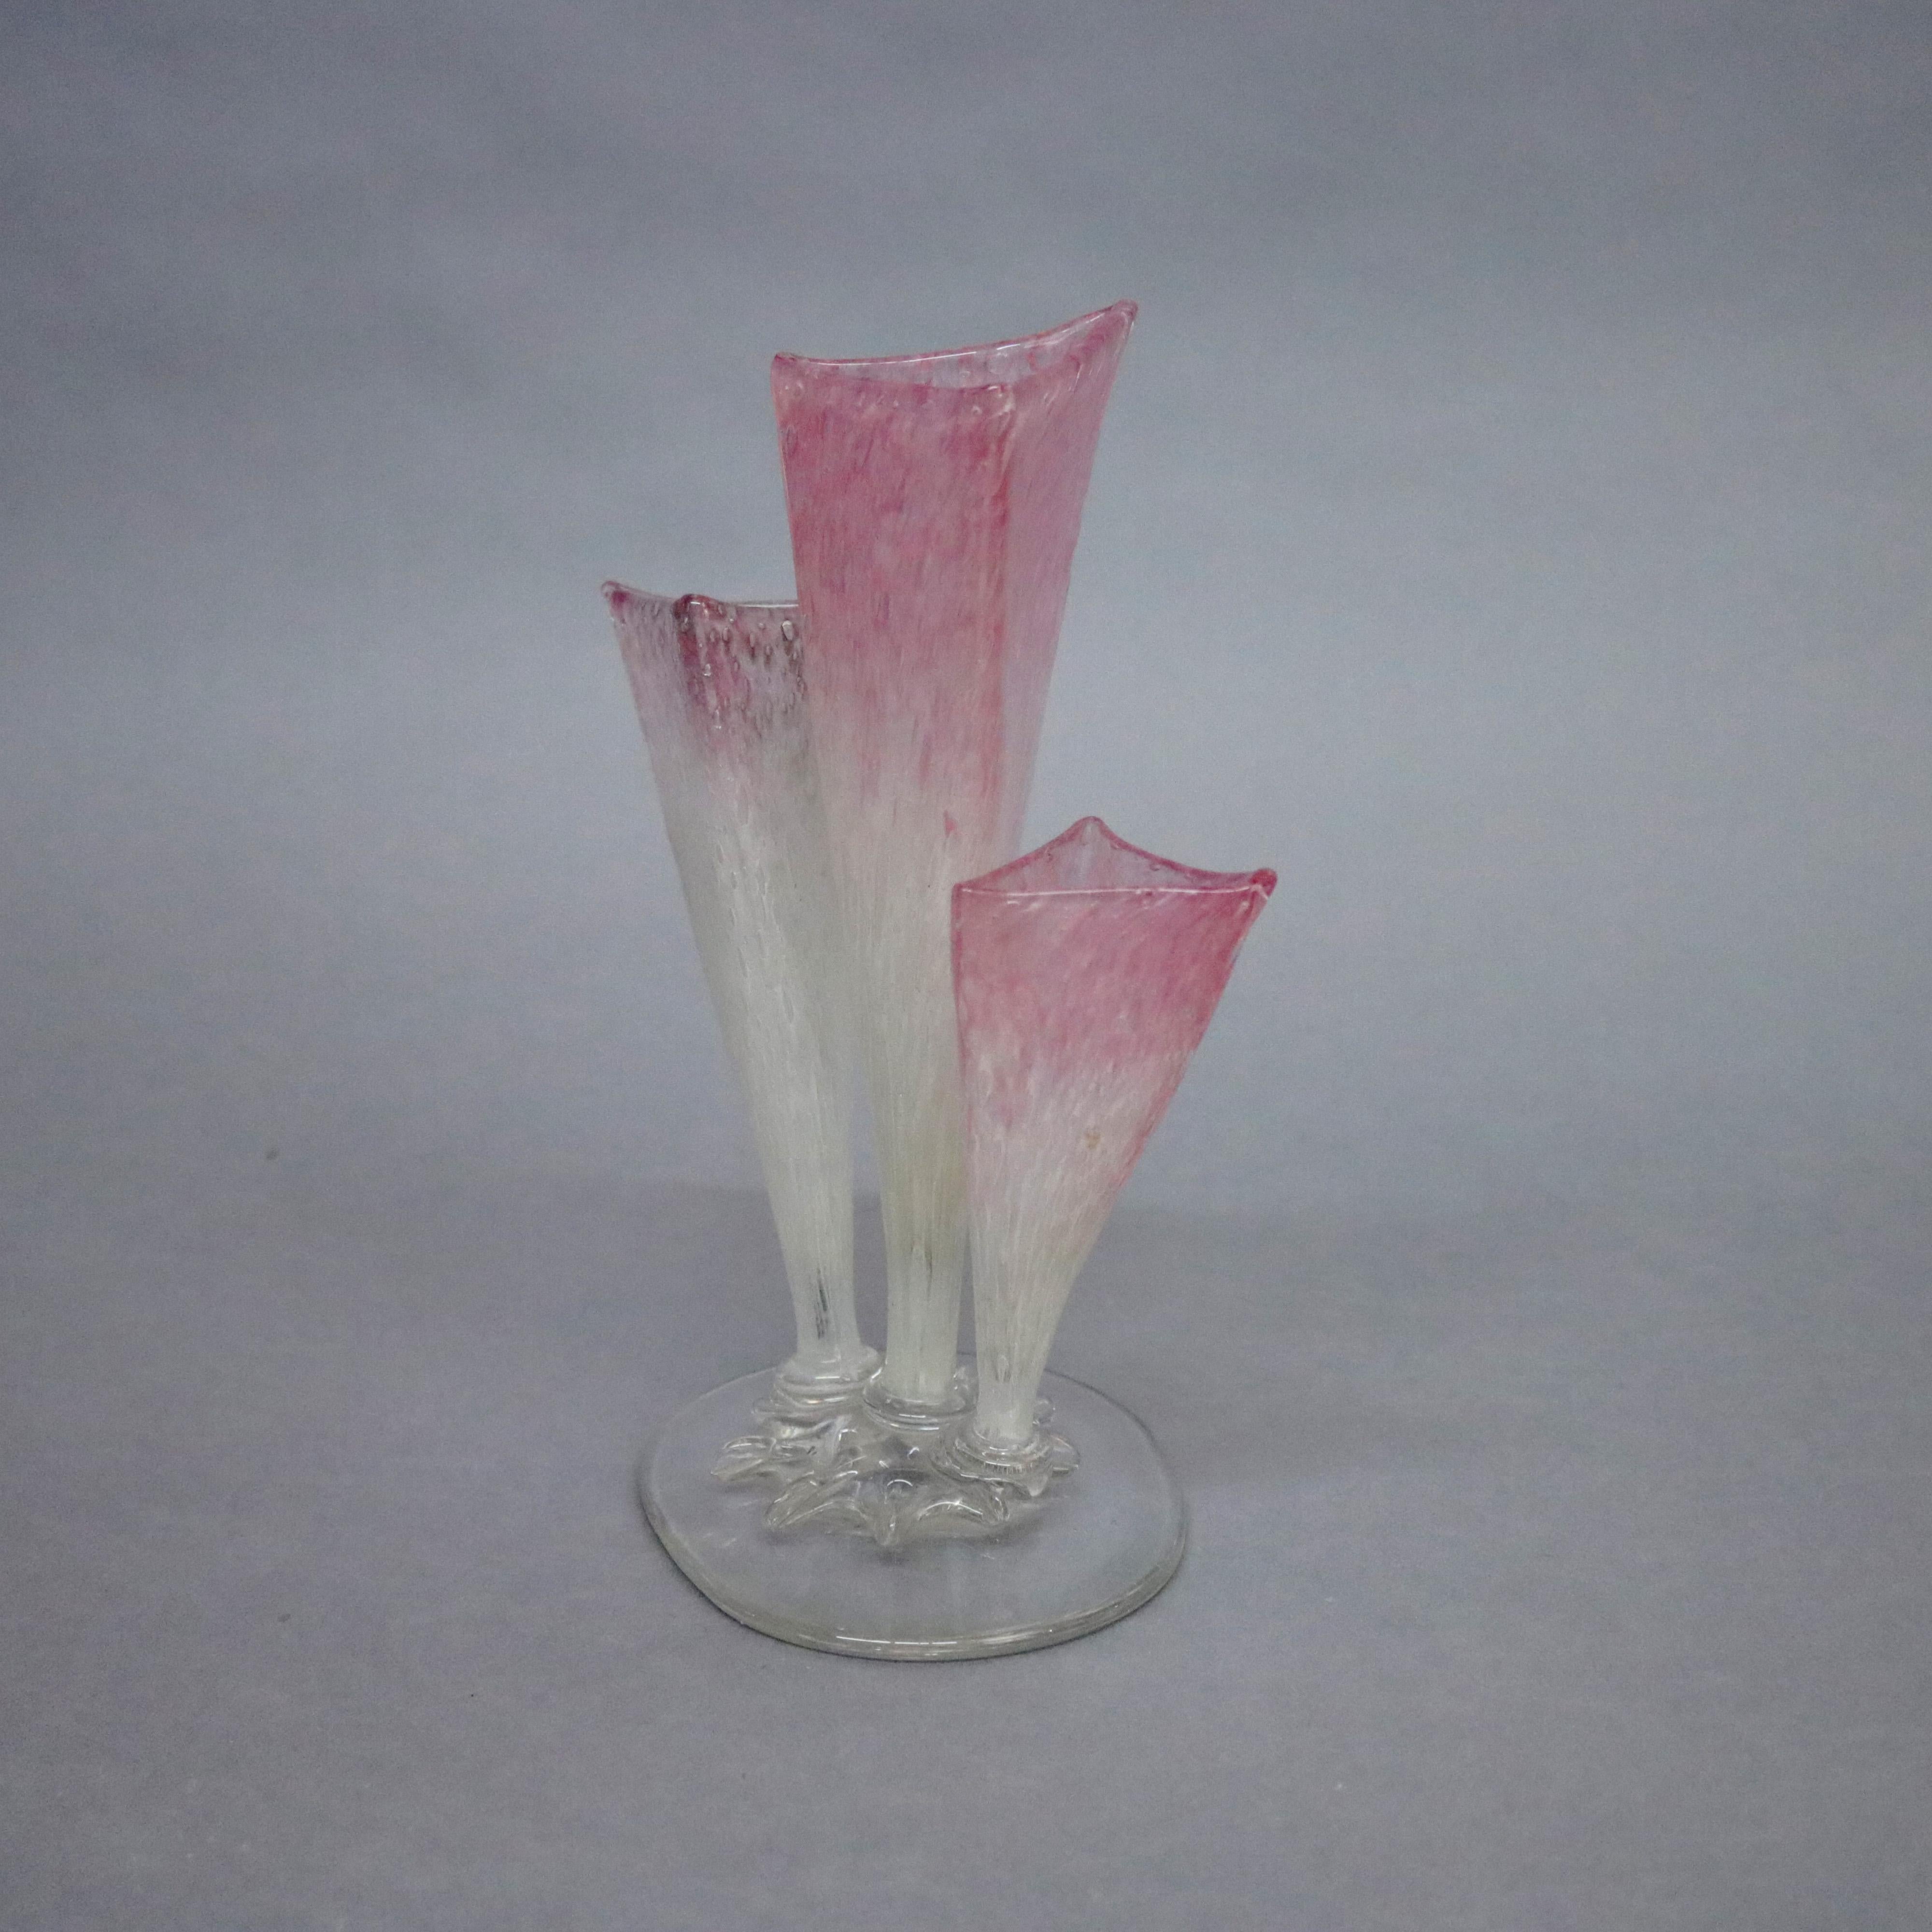 Steuben three prong stump vase features Rosaline into Alabaster Clutha bowls in pyramidal form surmounting crystal base, acid stamp signed, circa 1930.

Measures: 9.5